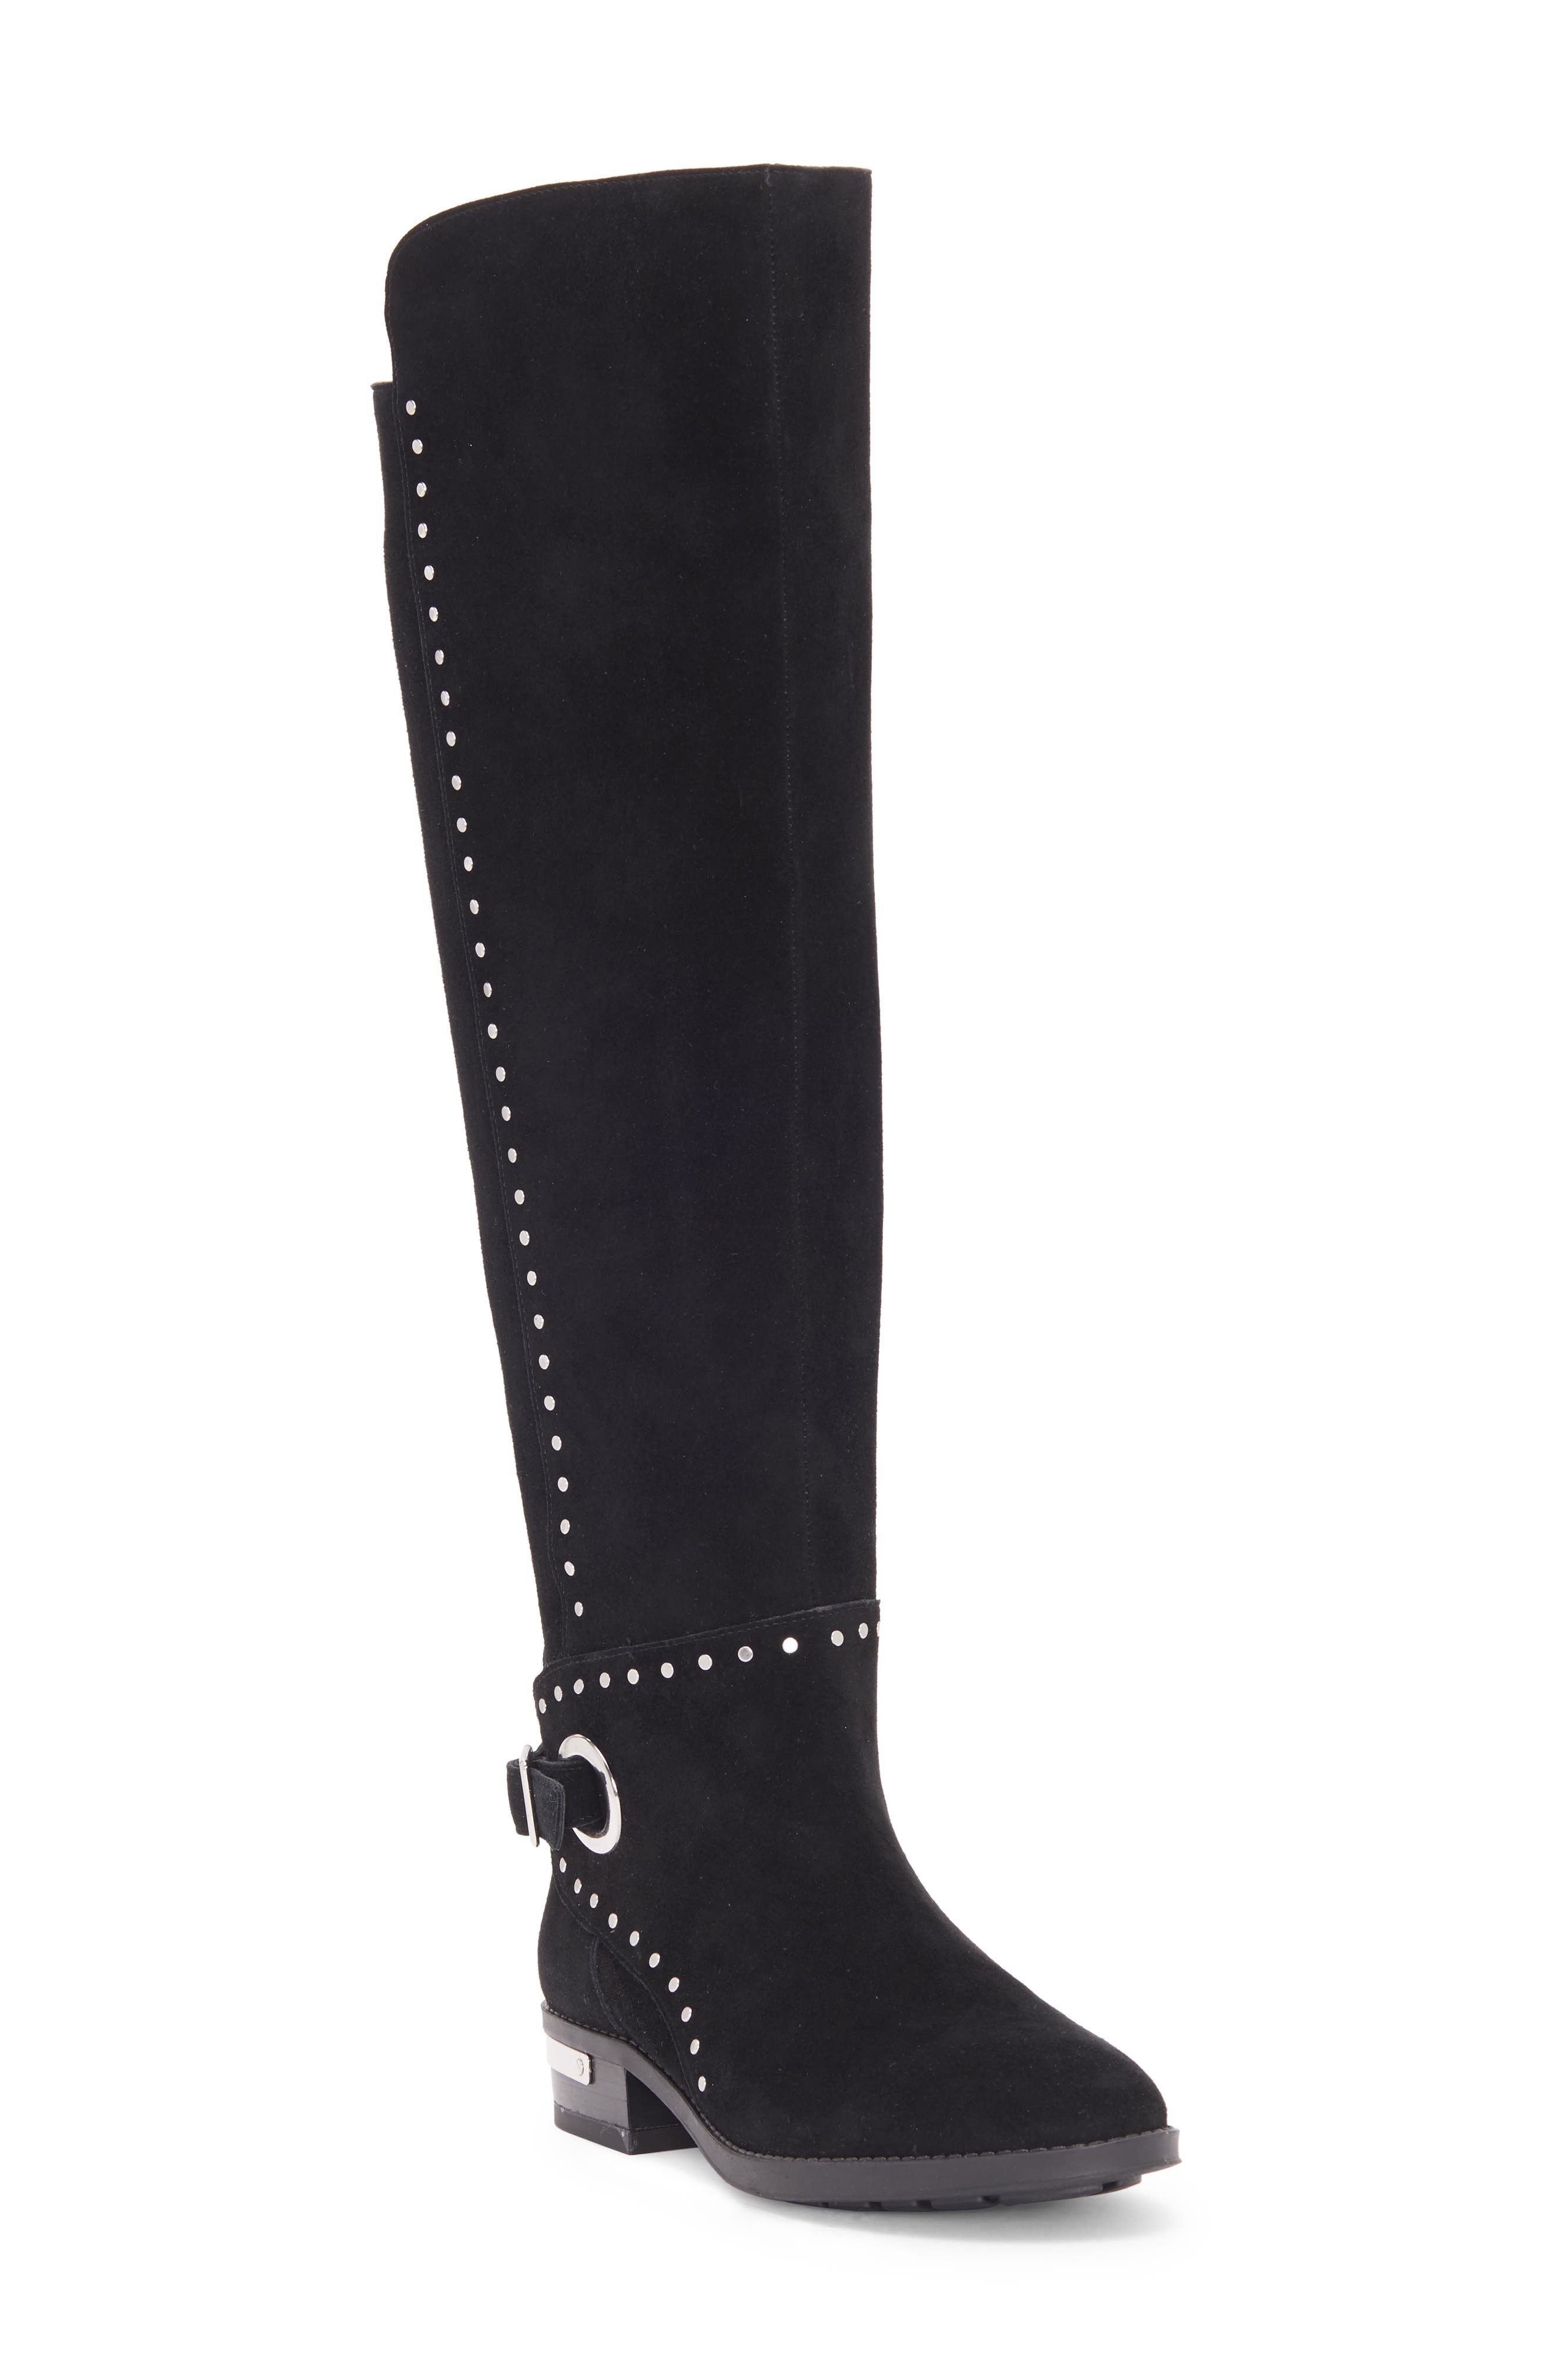 vince camuto boots with gold buckle